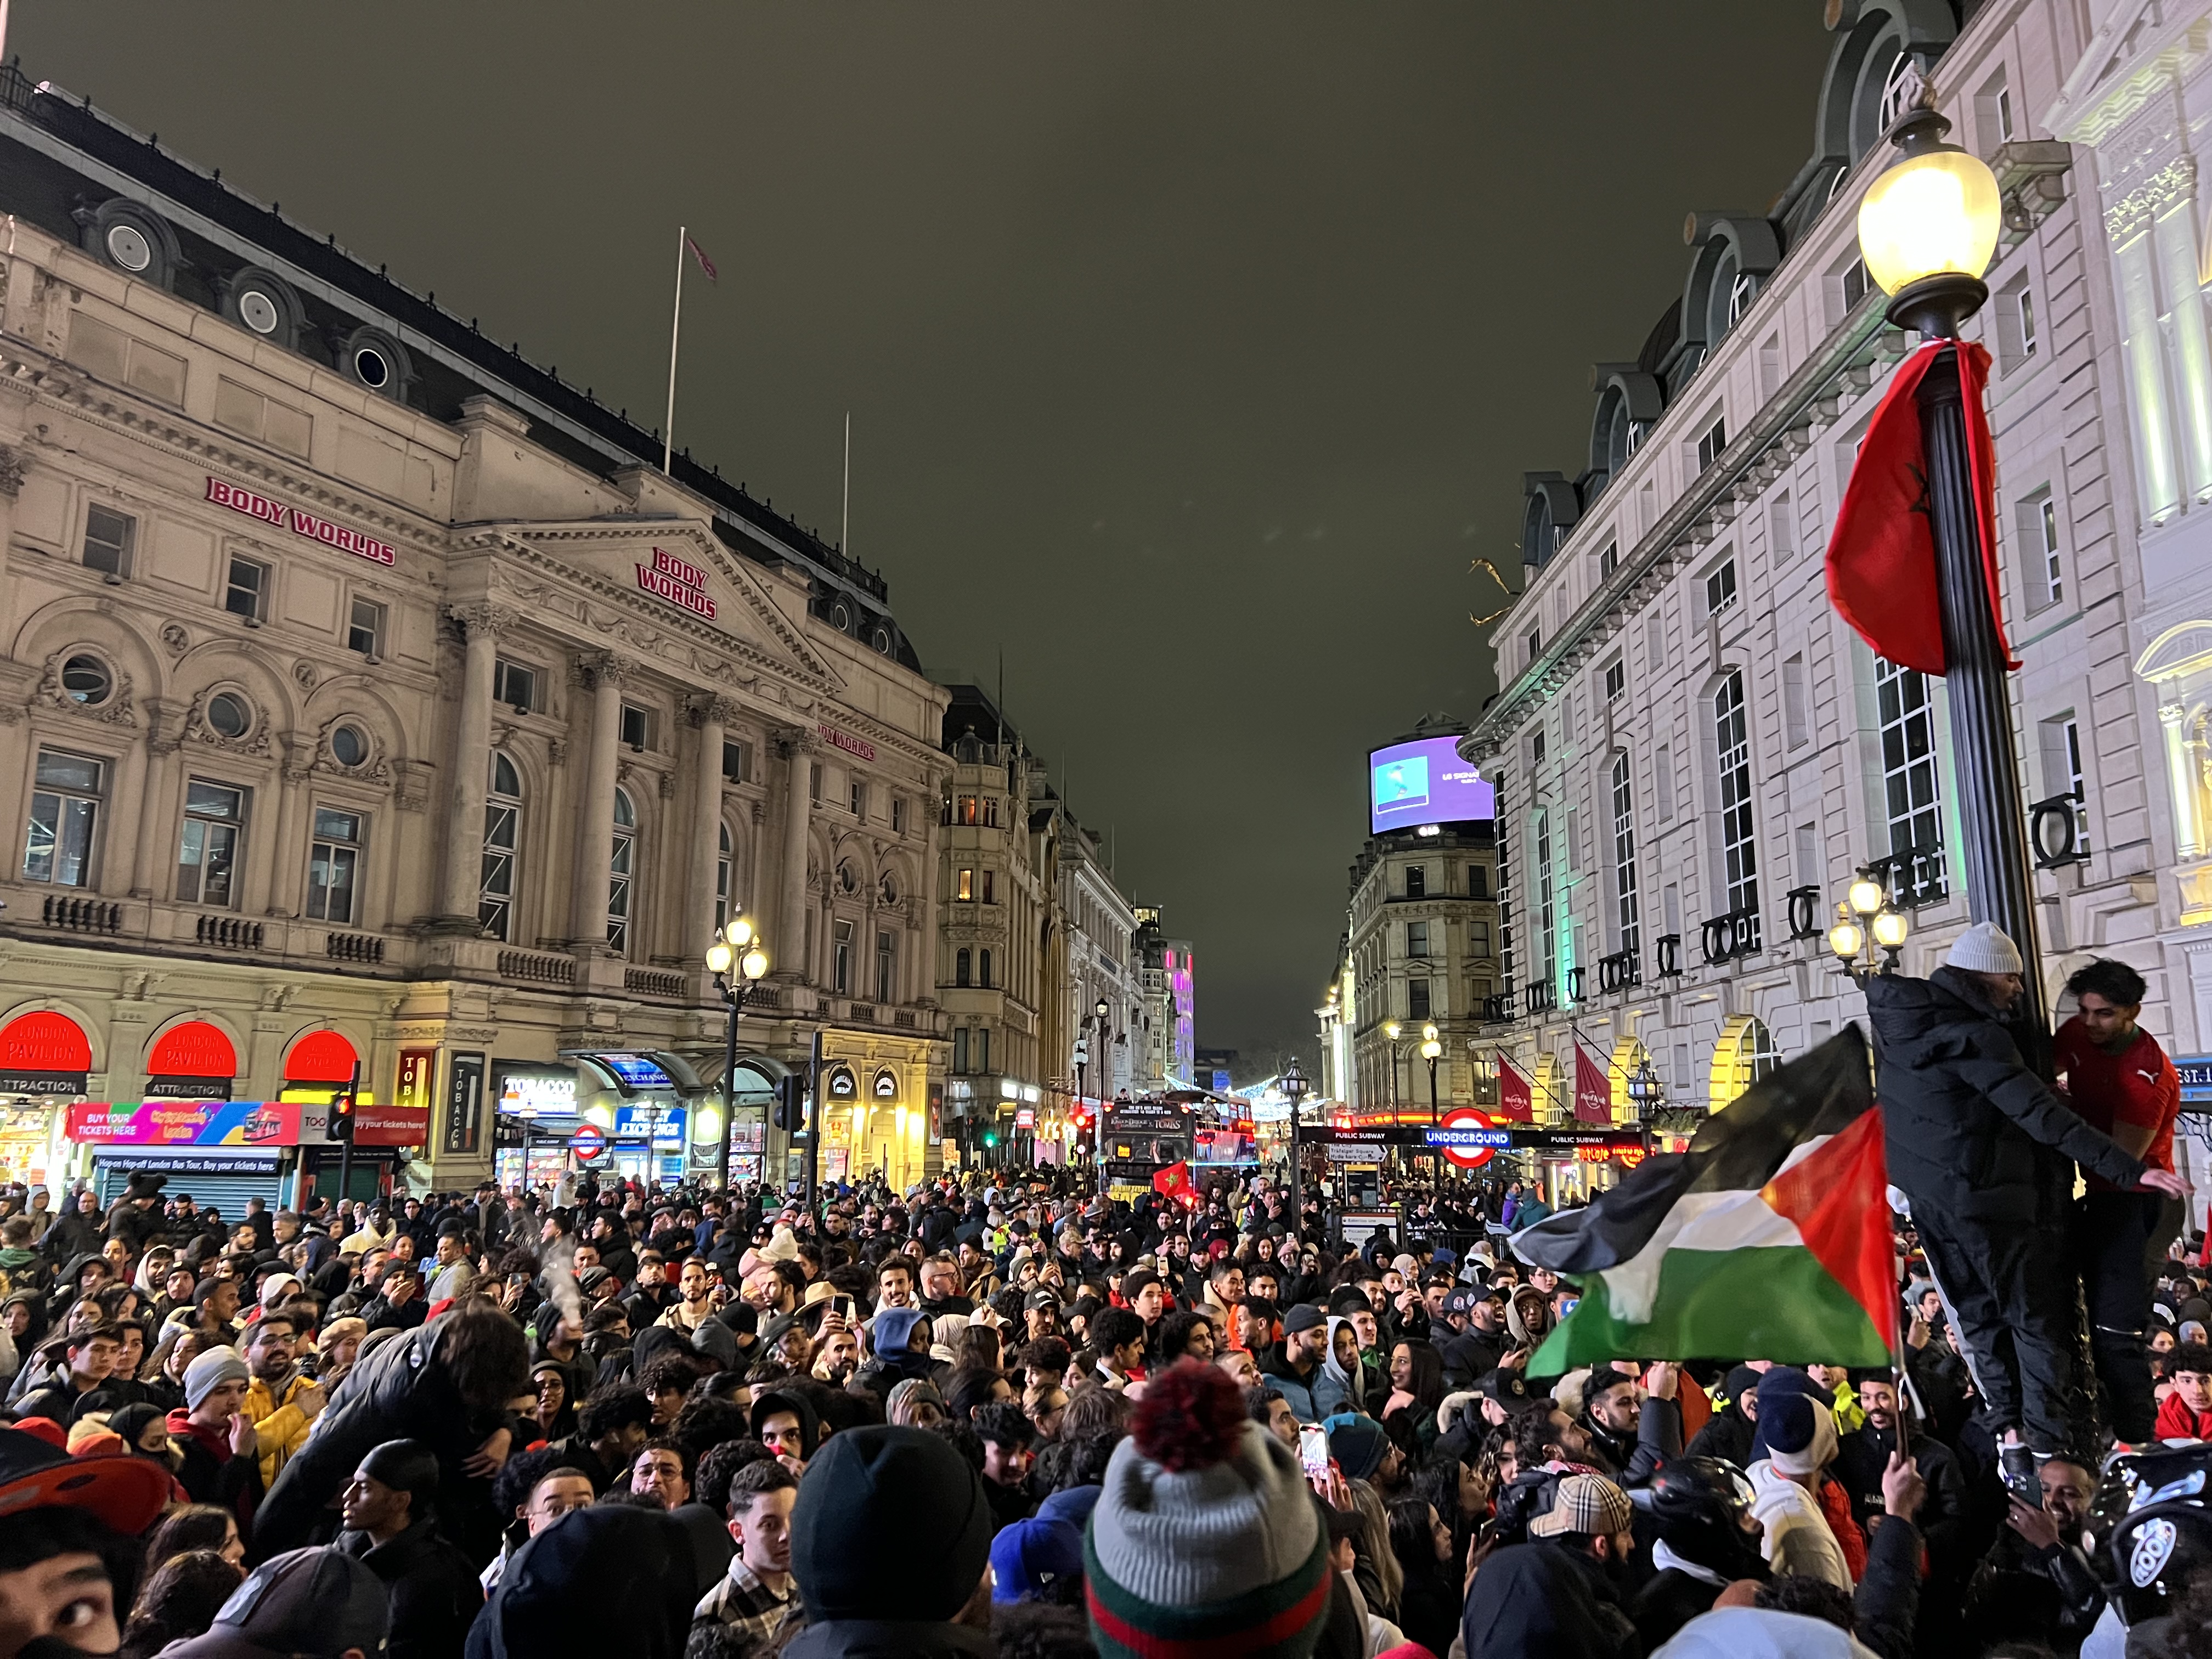 Hundreds of Moroccan supporters flocked to Piccadilly Circus to celebrate their win against Spain (MEE/Areeb ULLAH)